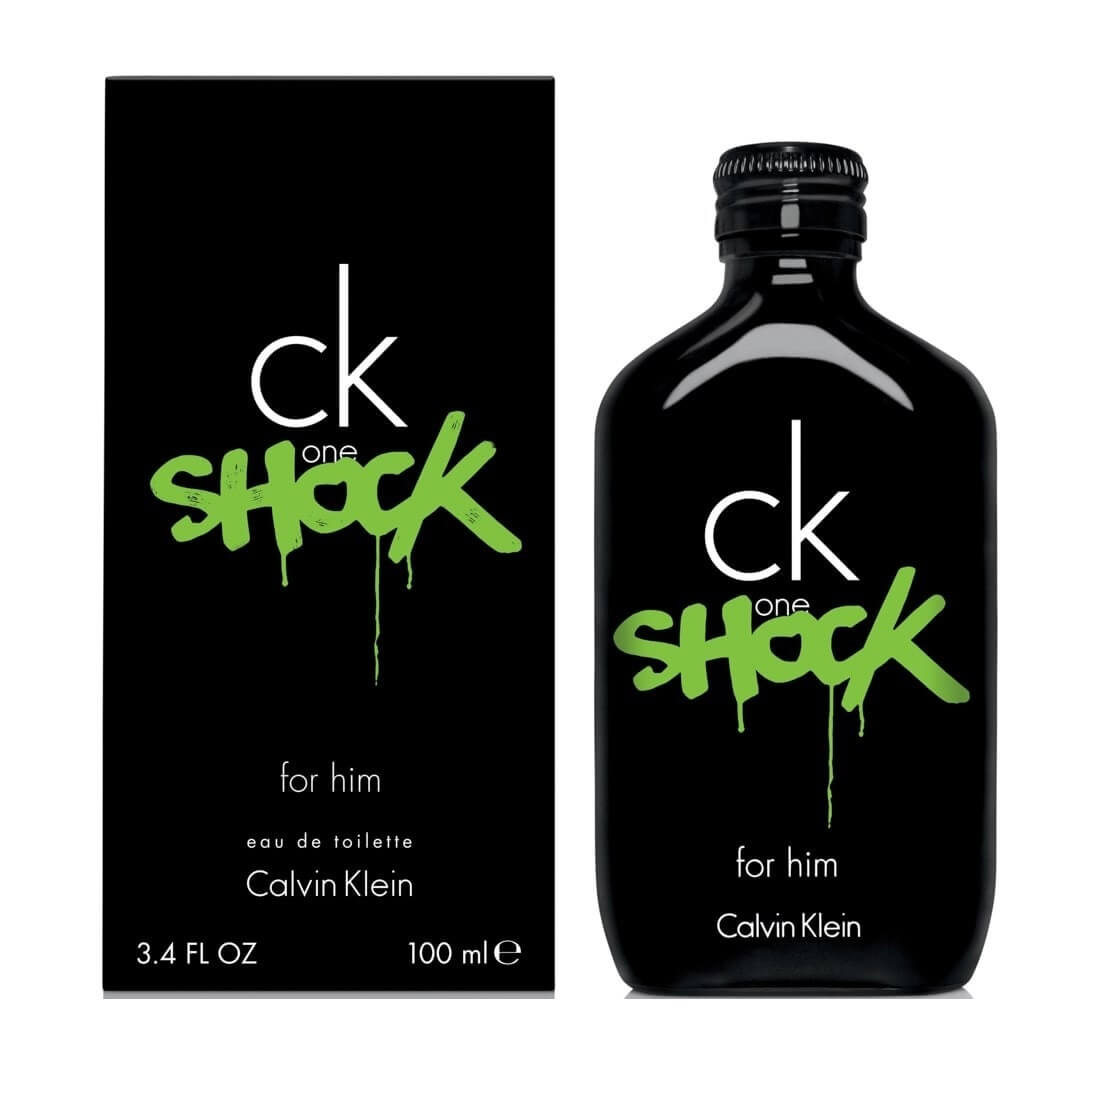 ck shock for him 200ml